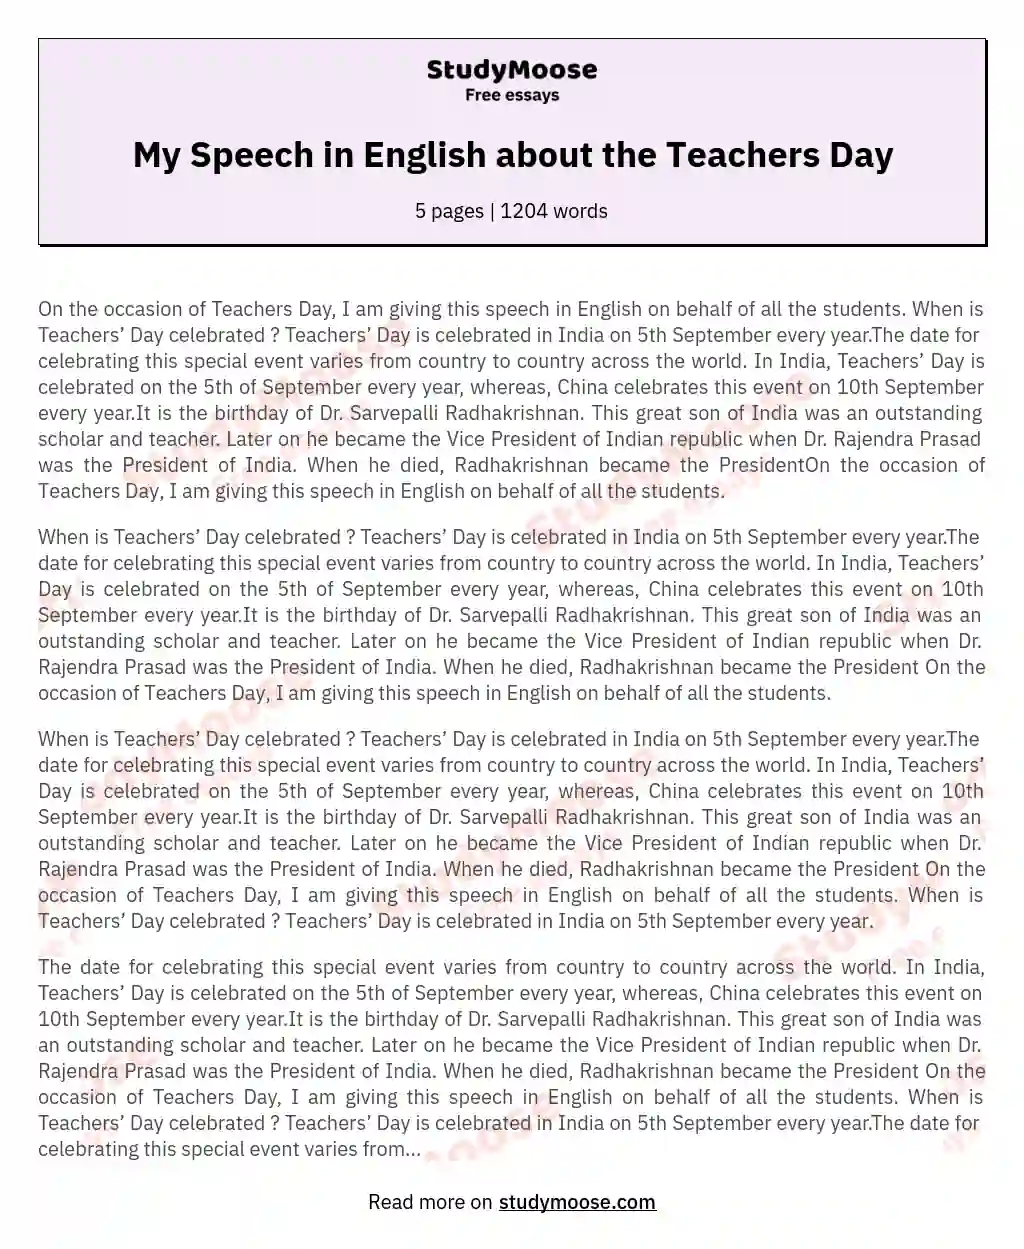 My Speech in English about the Teachers Day essay